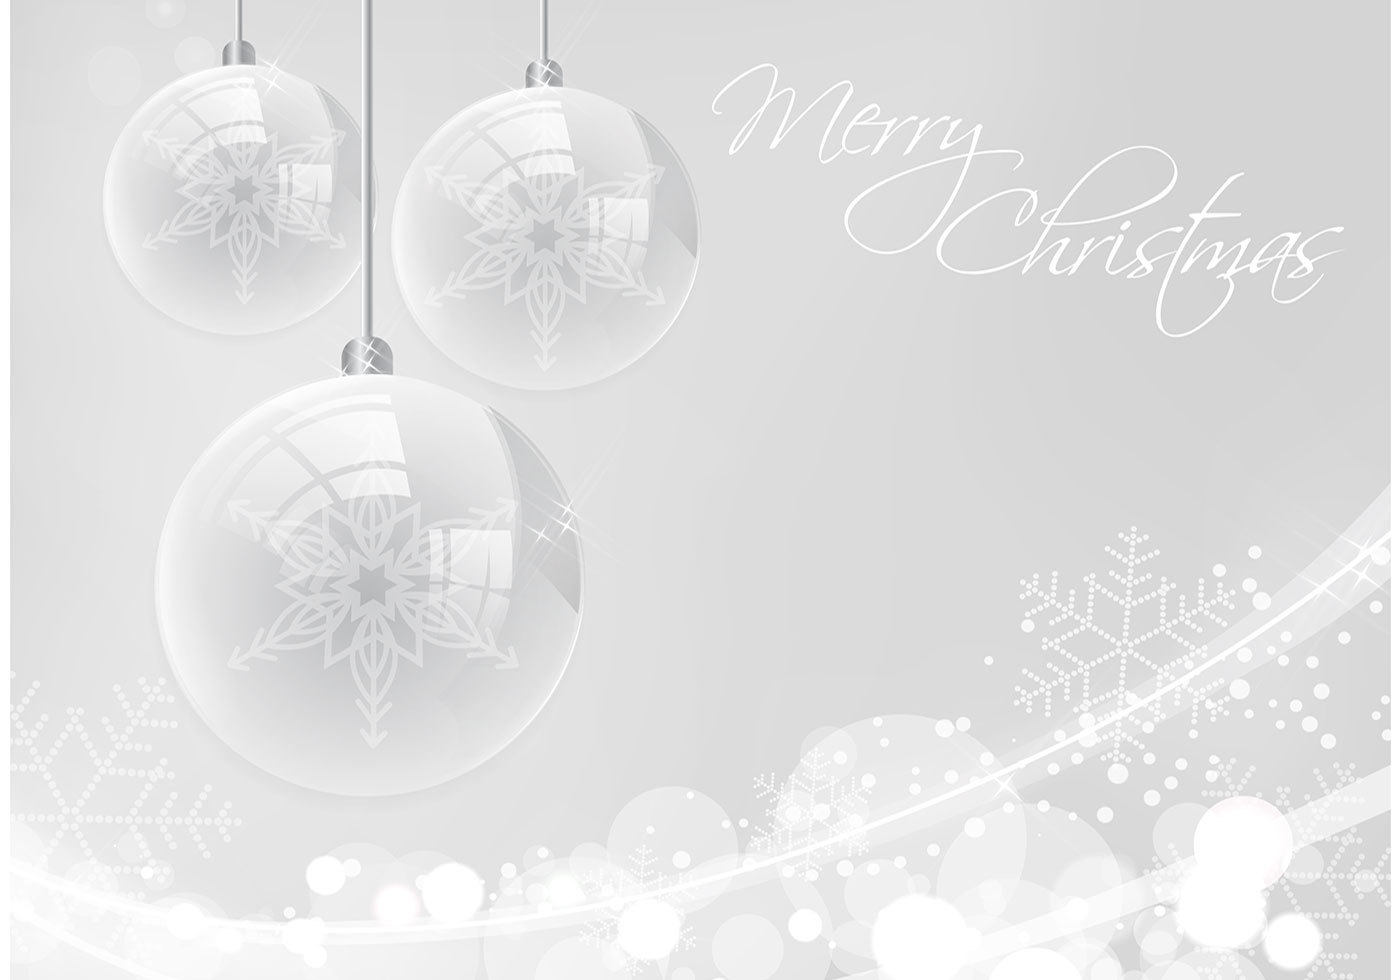 Silver Merry Christmas PSD Background Photohop Brushes at Brusheezy!